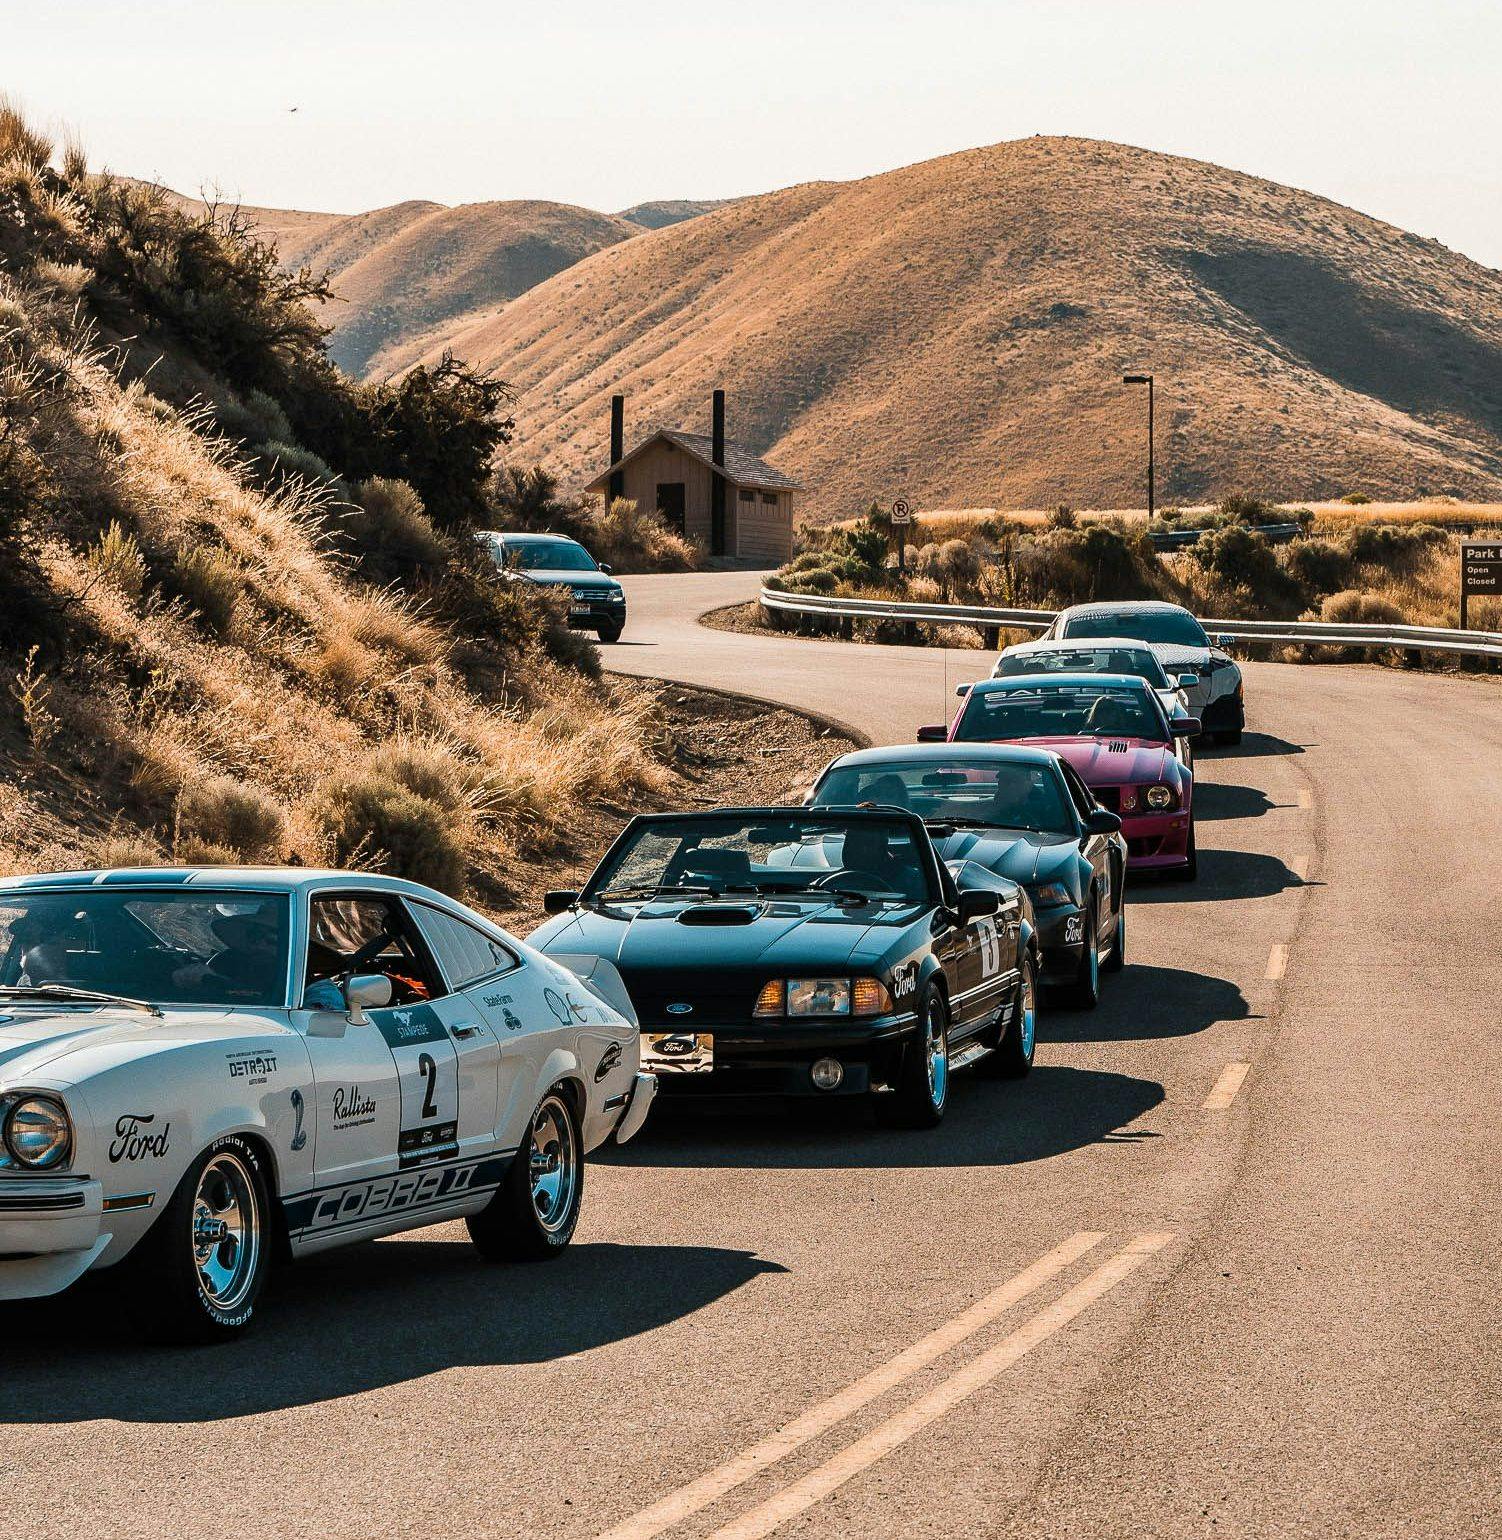 Line of Mustangs going to Mustang reveal event